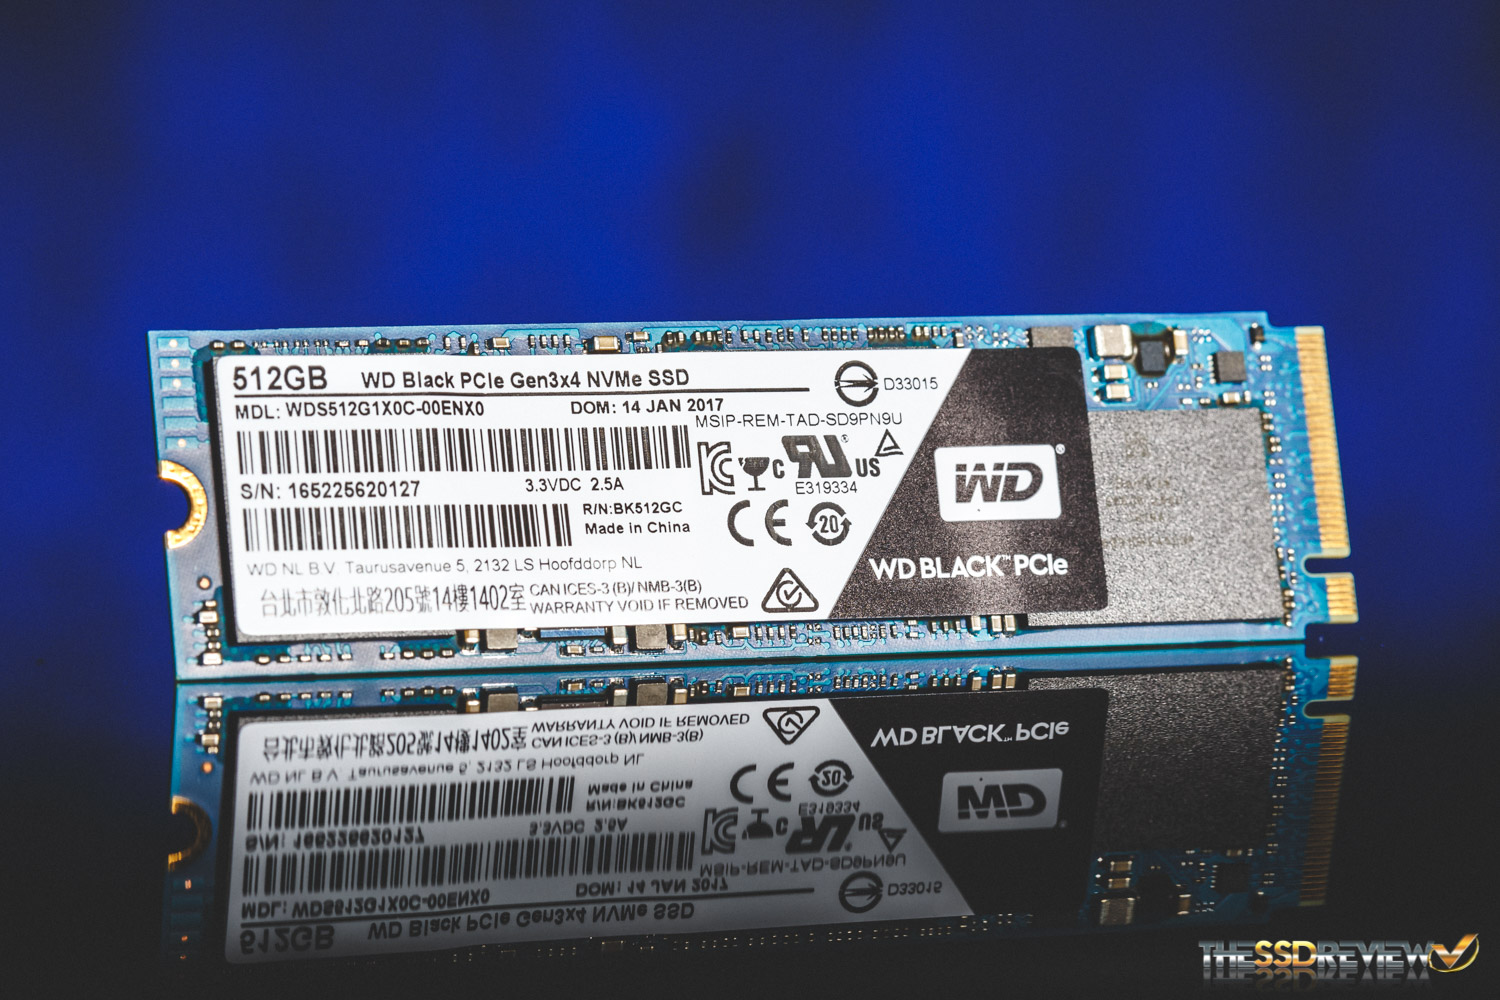 WD Black PCIe NVMe SSD Review - Does It Live Up To Its Lineage? The SSD Review